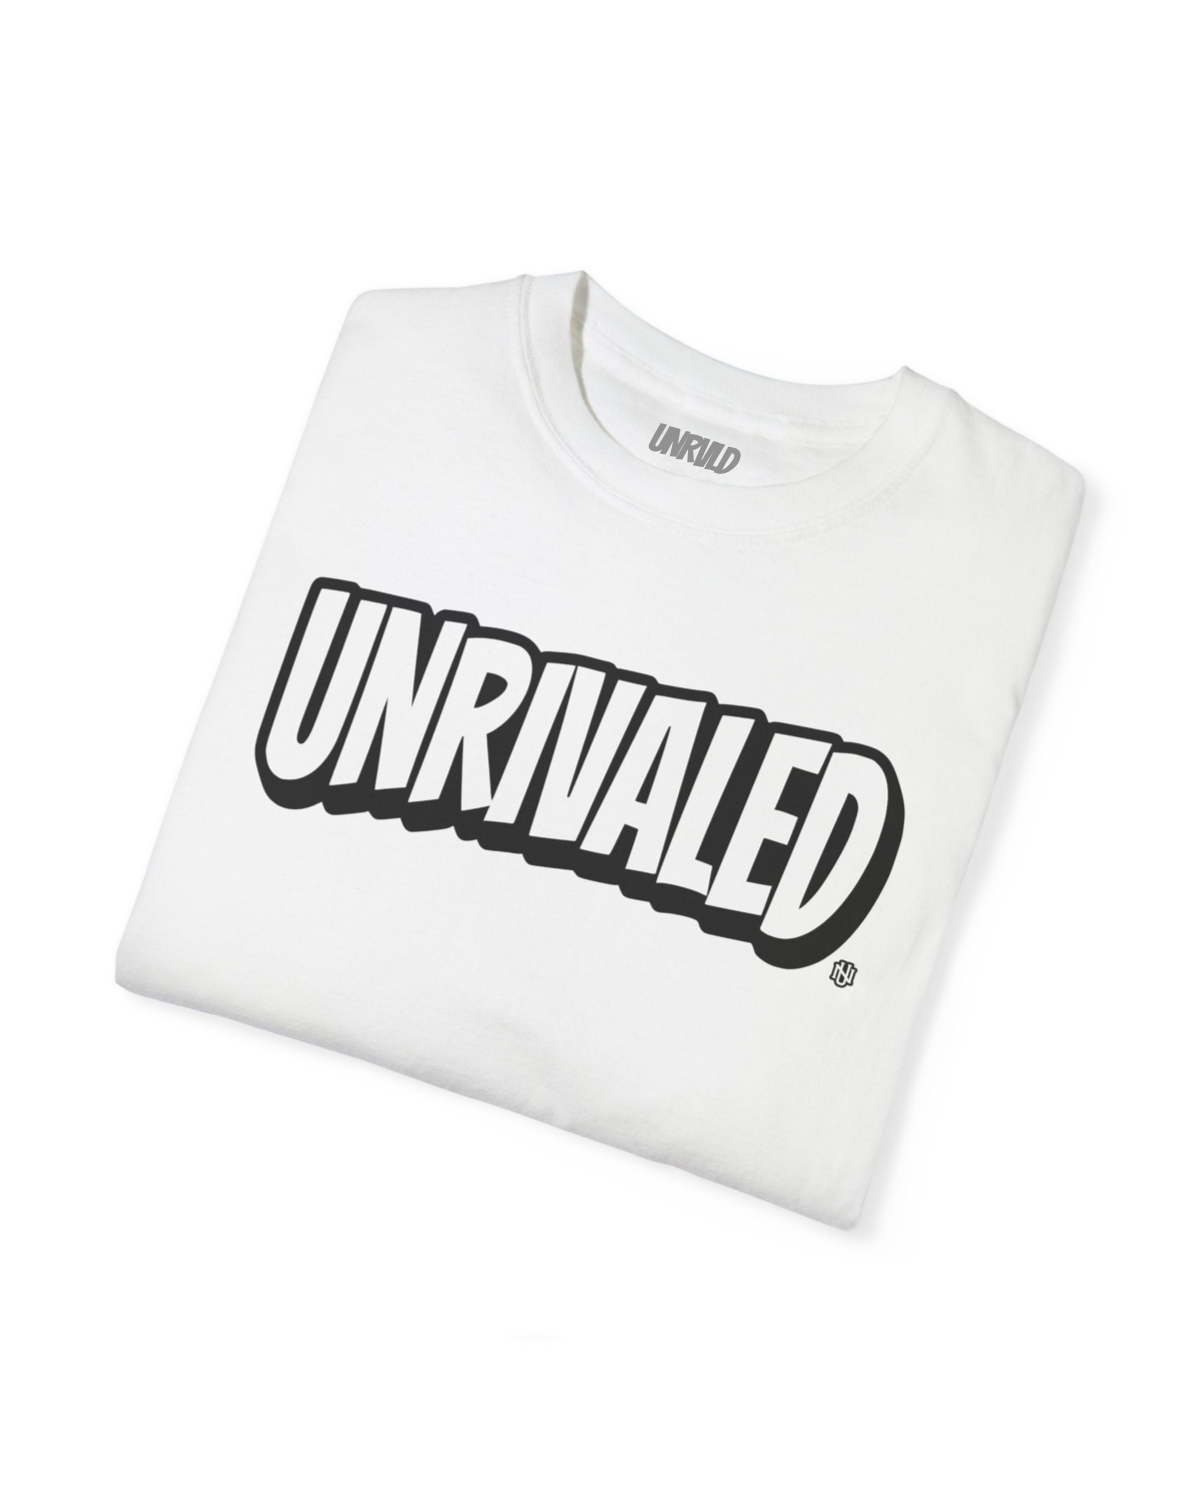 Garment Dyed Unrivaled Tee